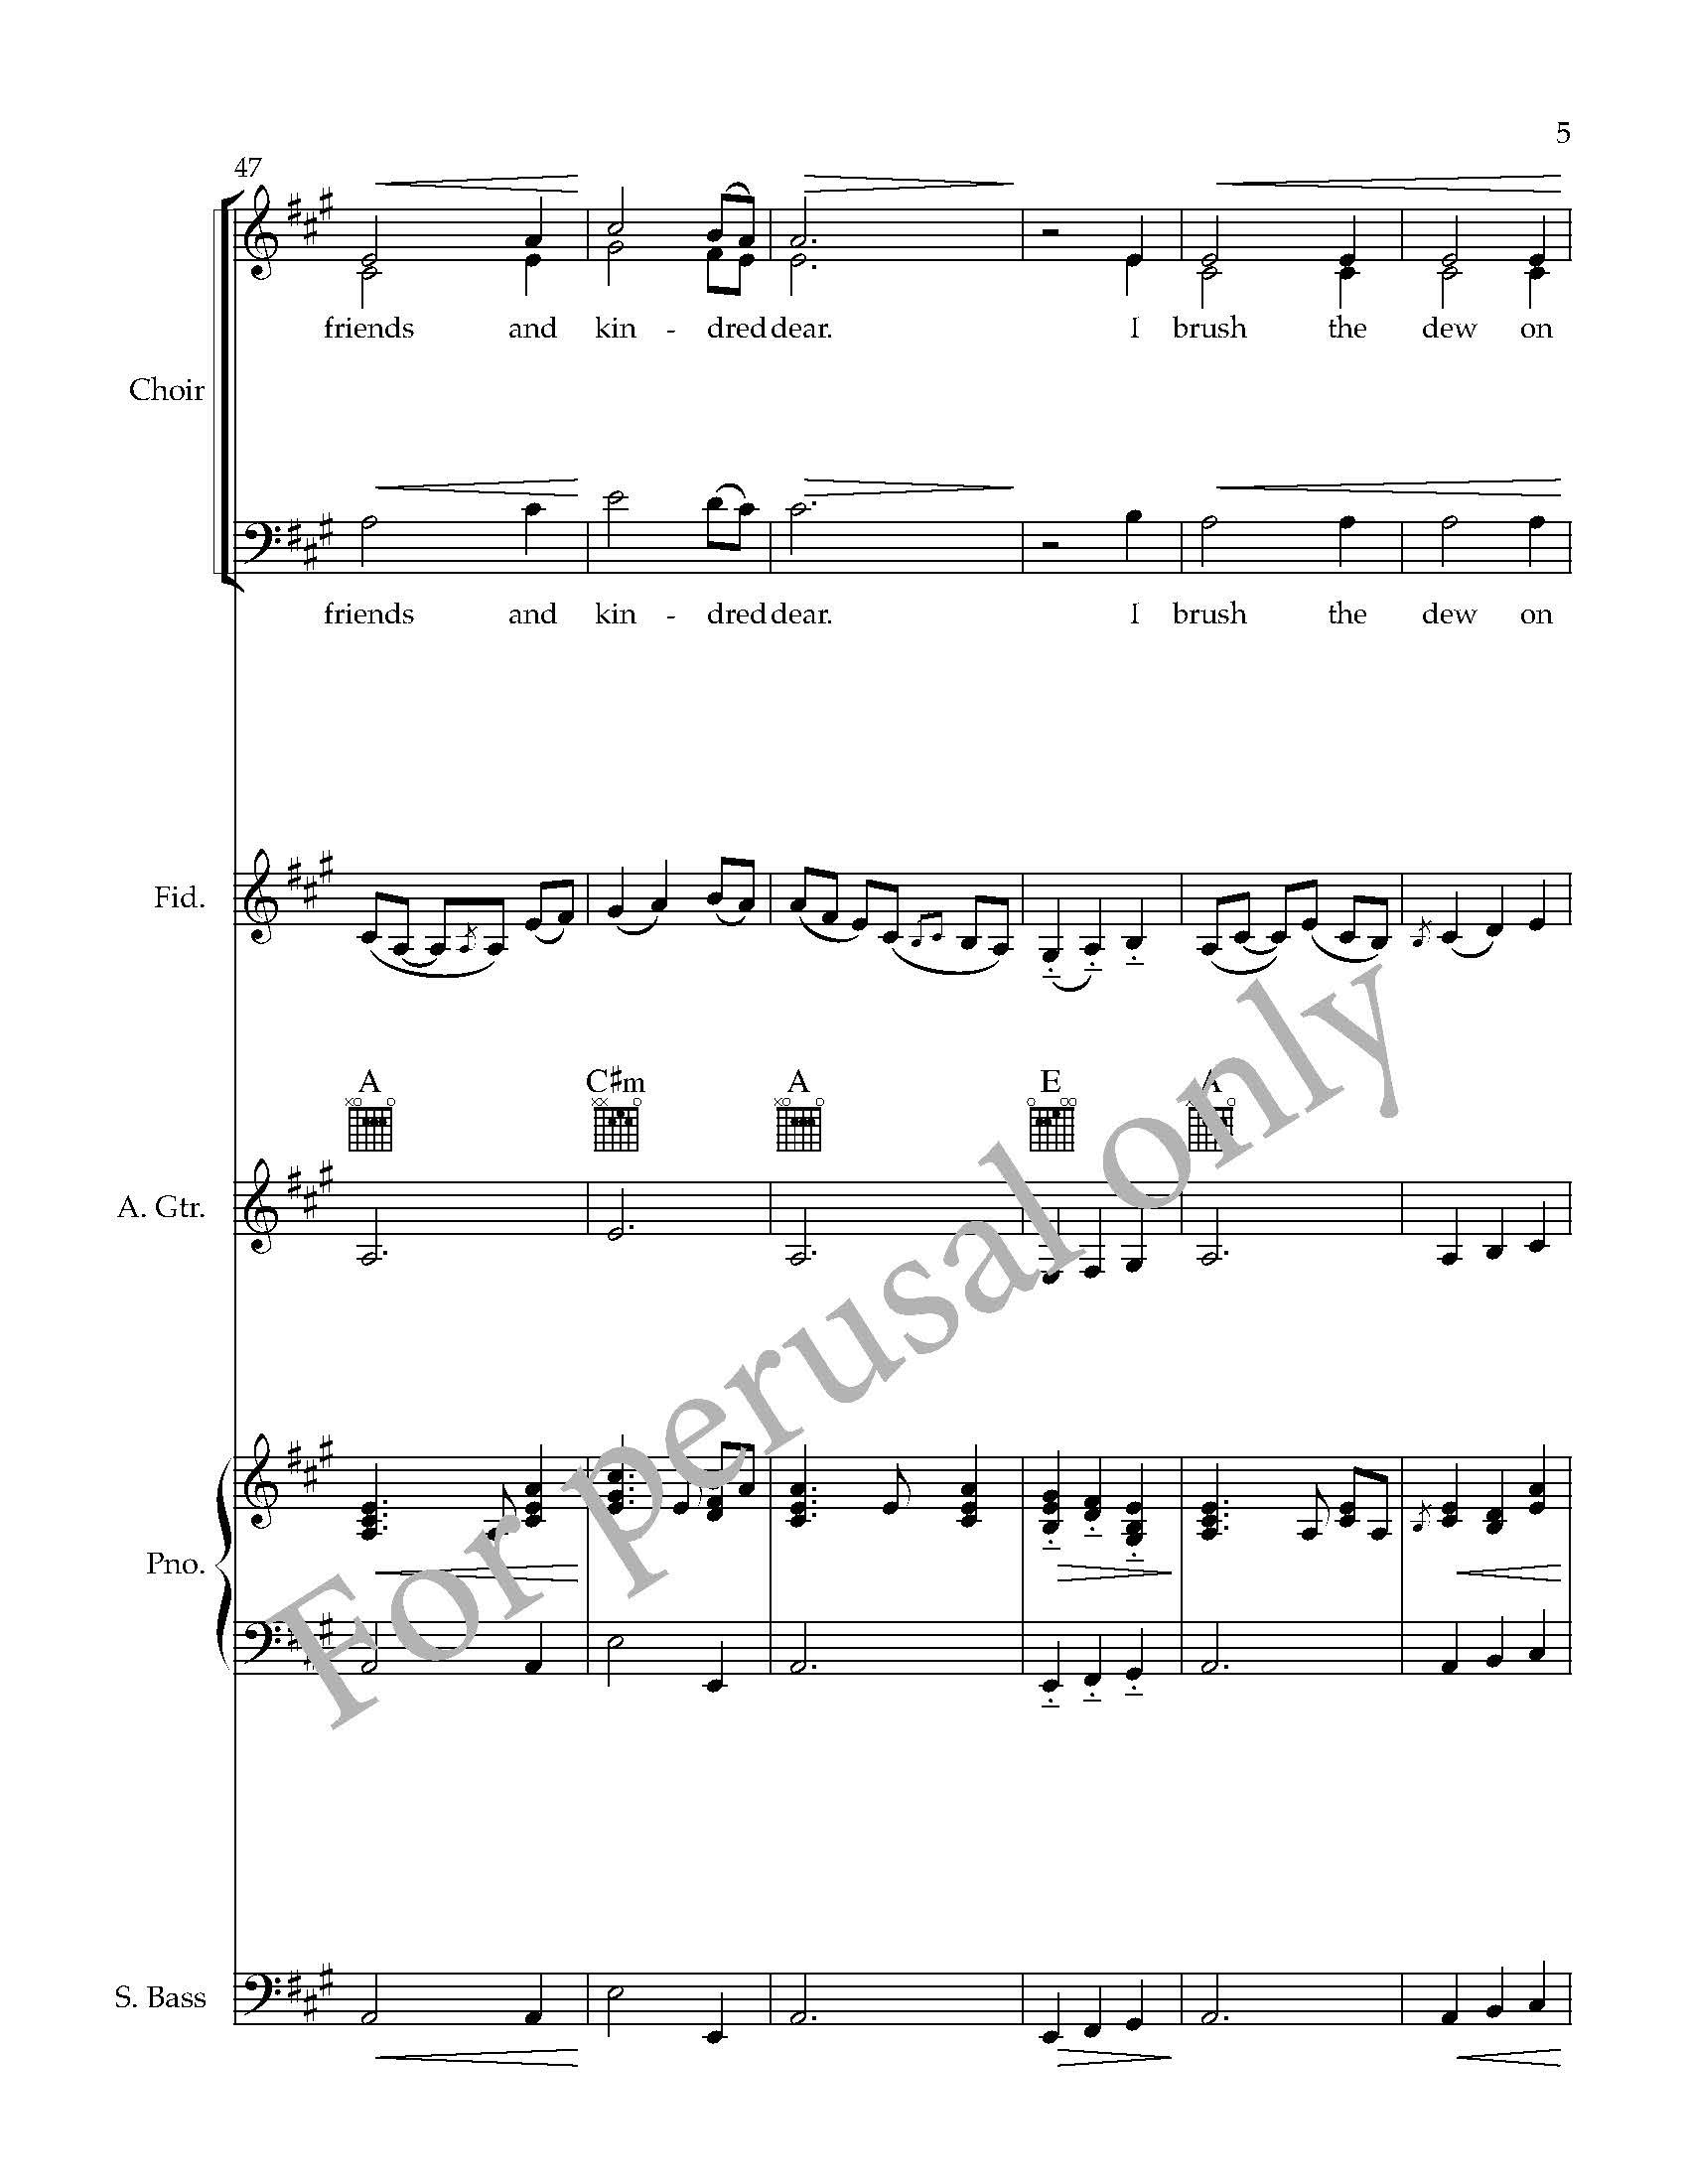 FULL SCORE preview - Angel Band for choir, fiddle, piano, guitar, and bass - arr_Page_05.jpg